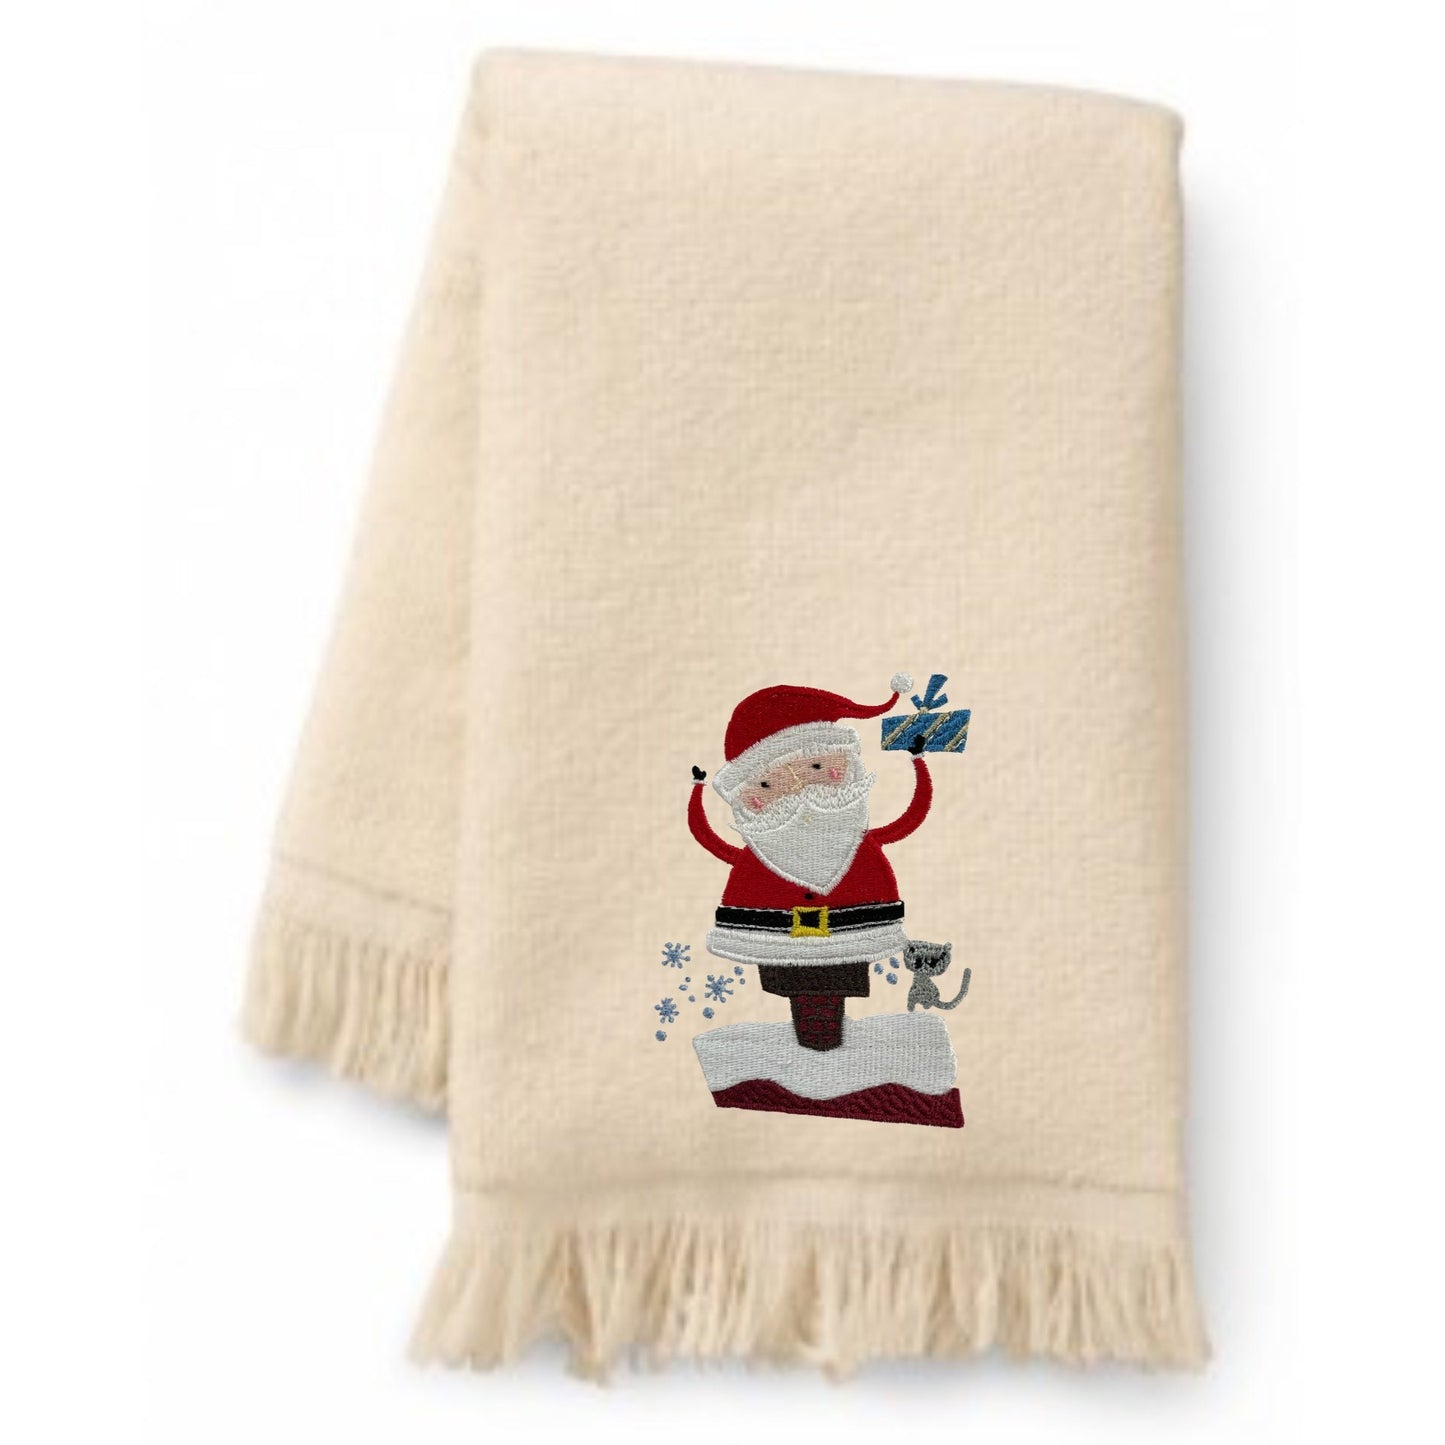 Embroidered Winter Christmas Towels “Oh What Fun” Bath Towels. 100% Plush  Cotton Hand or Fingertip Towel